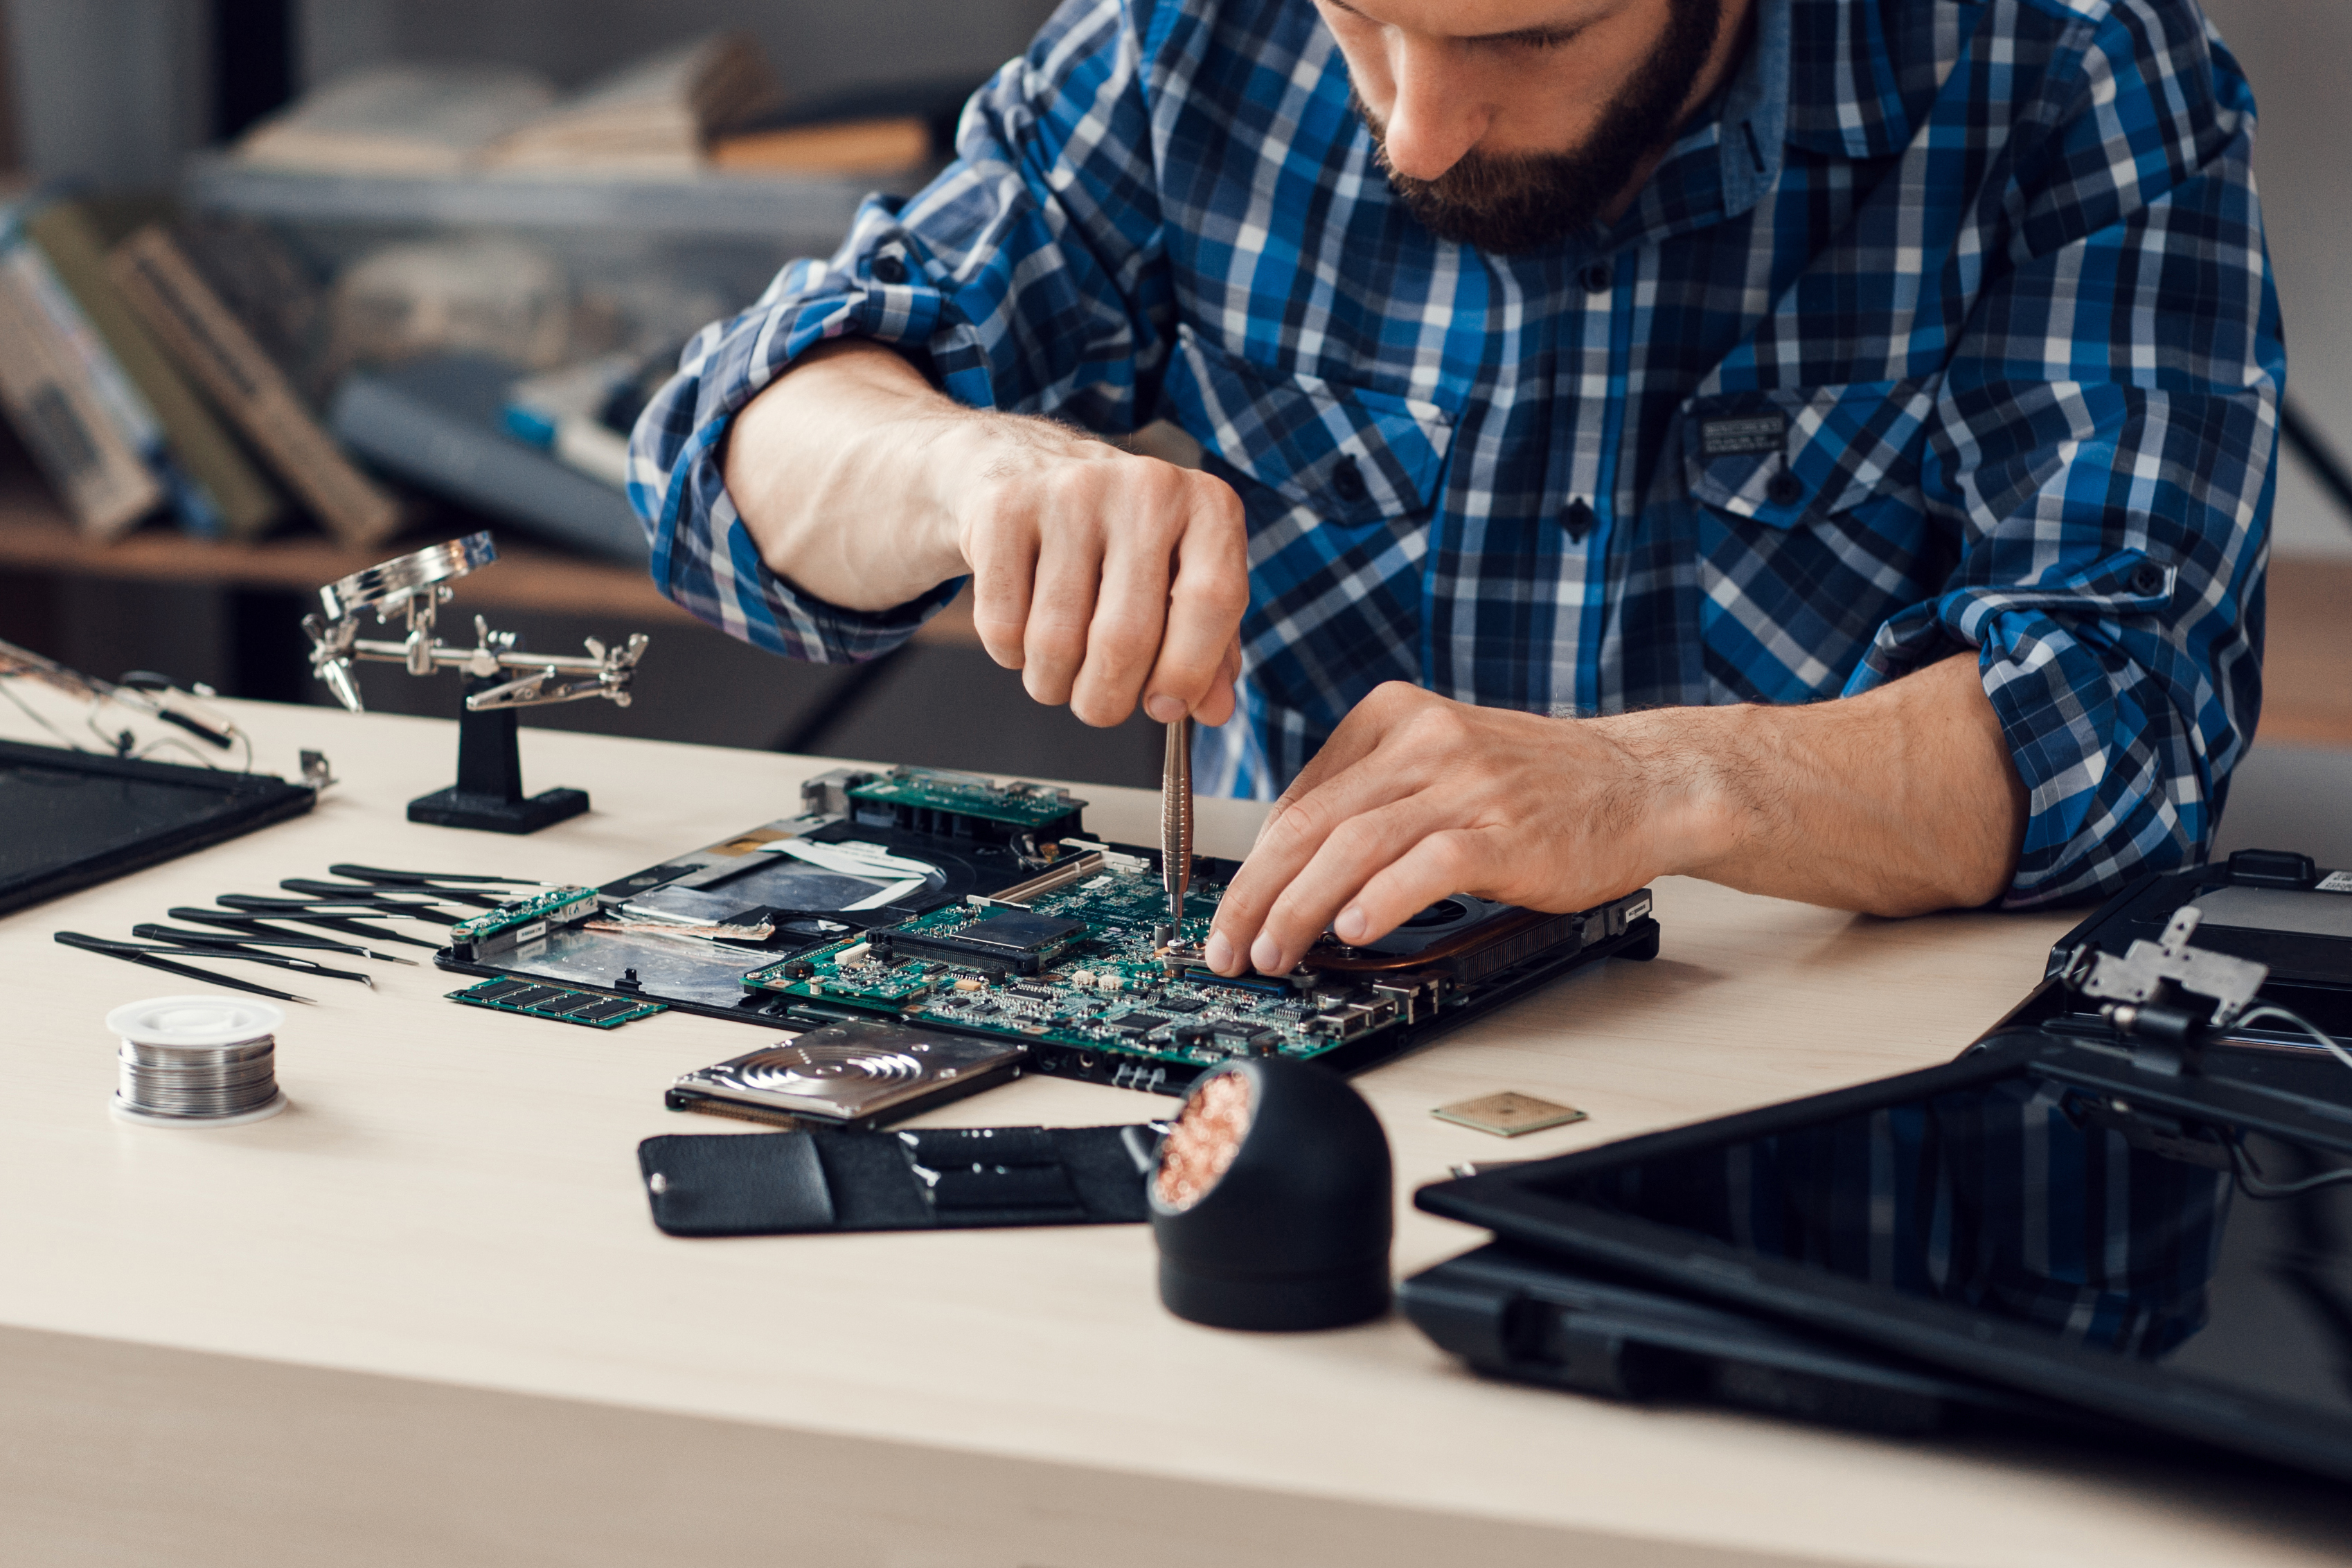 Man sitting at a table repairing a laptop